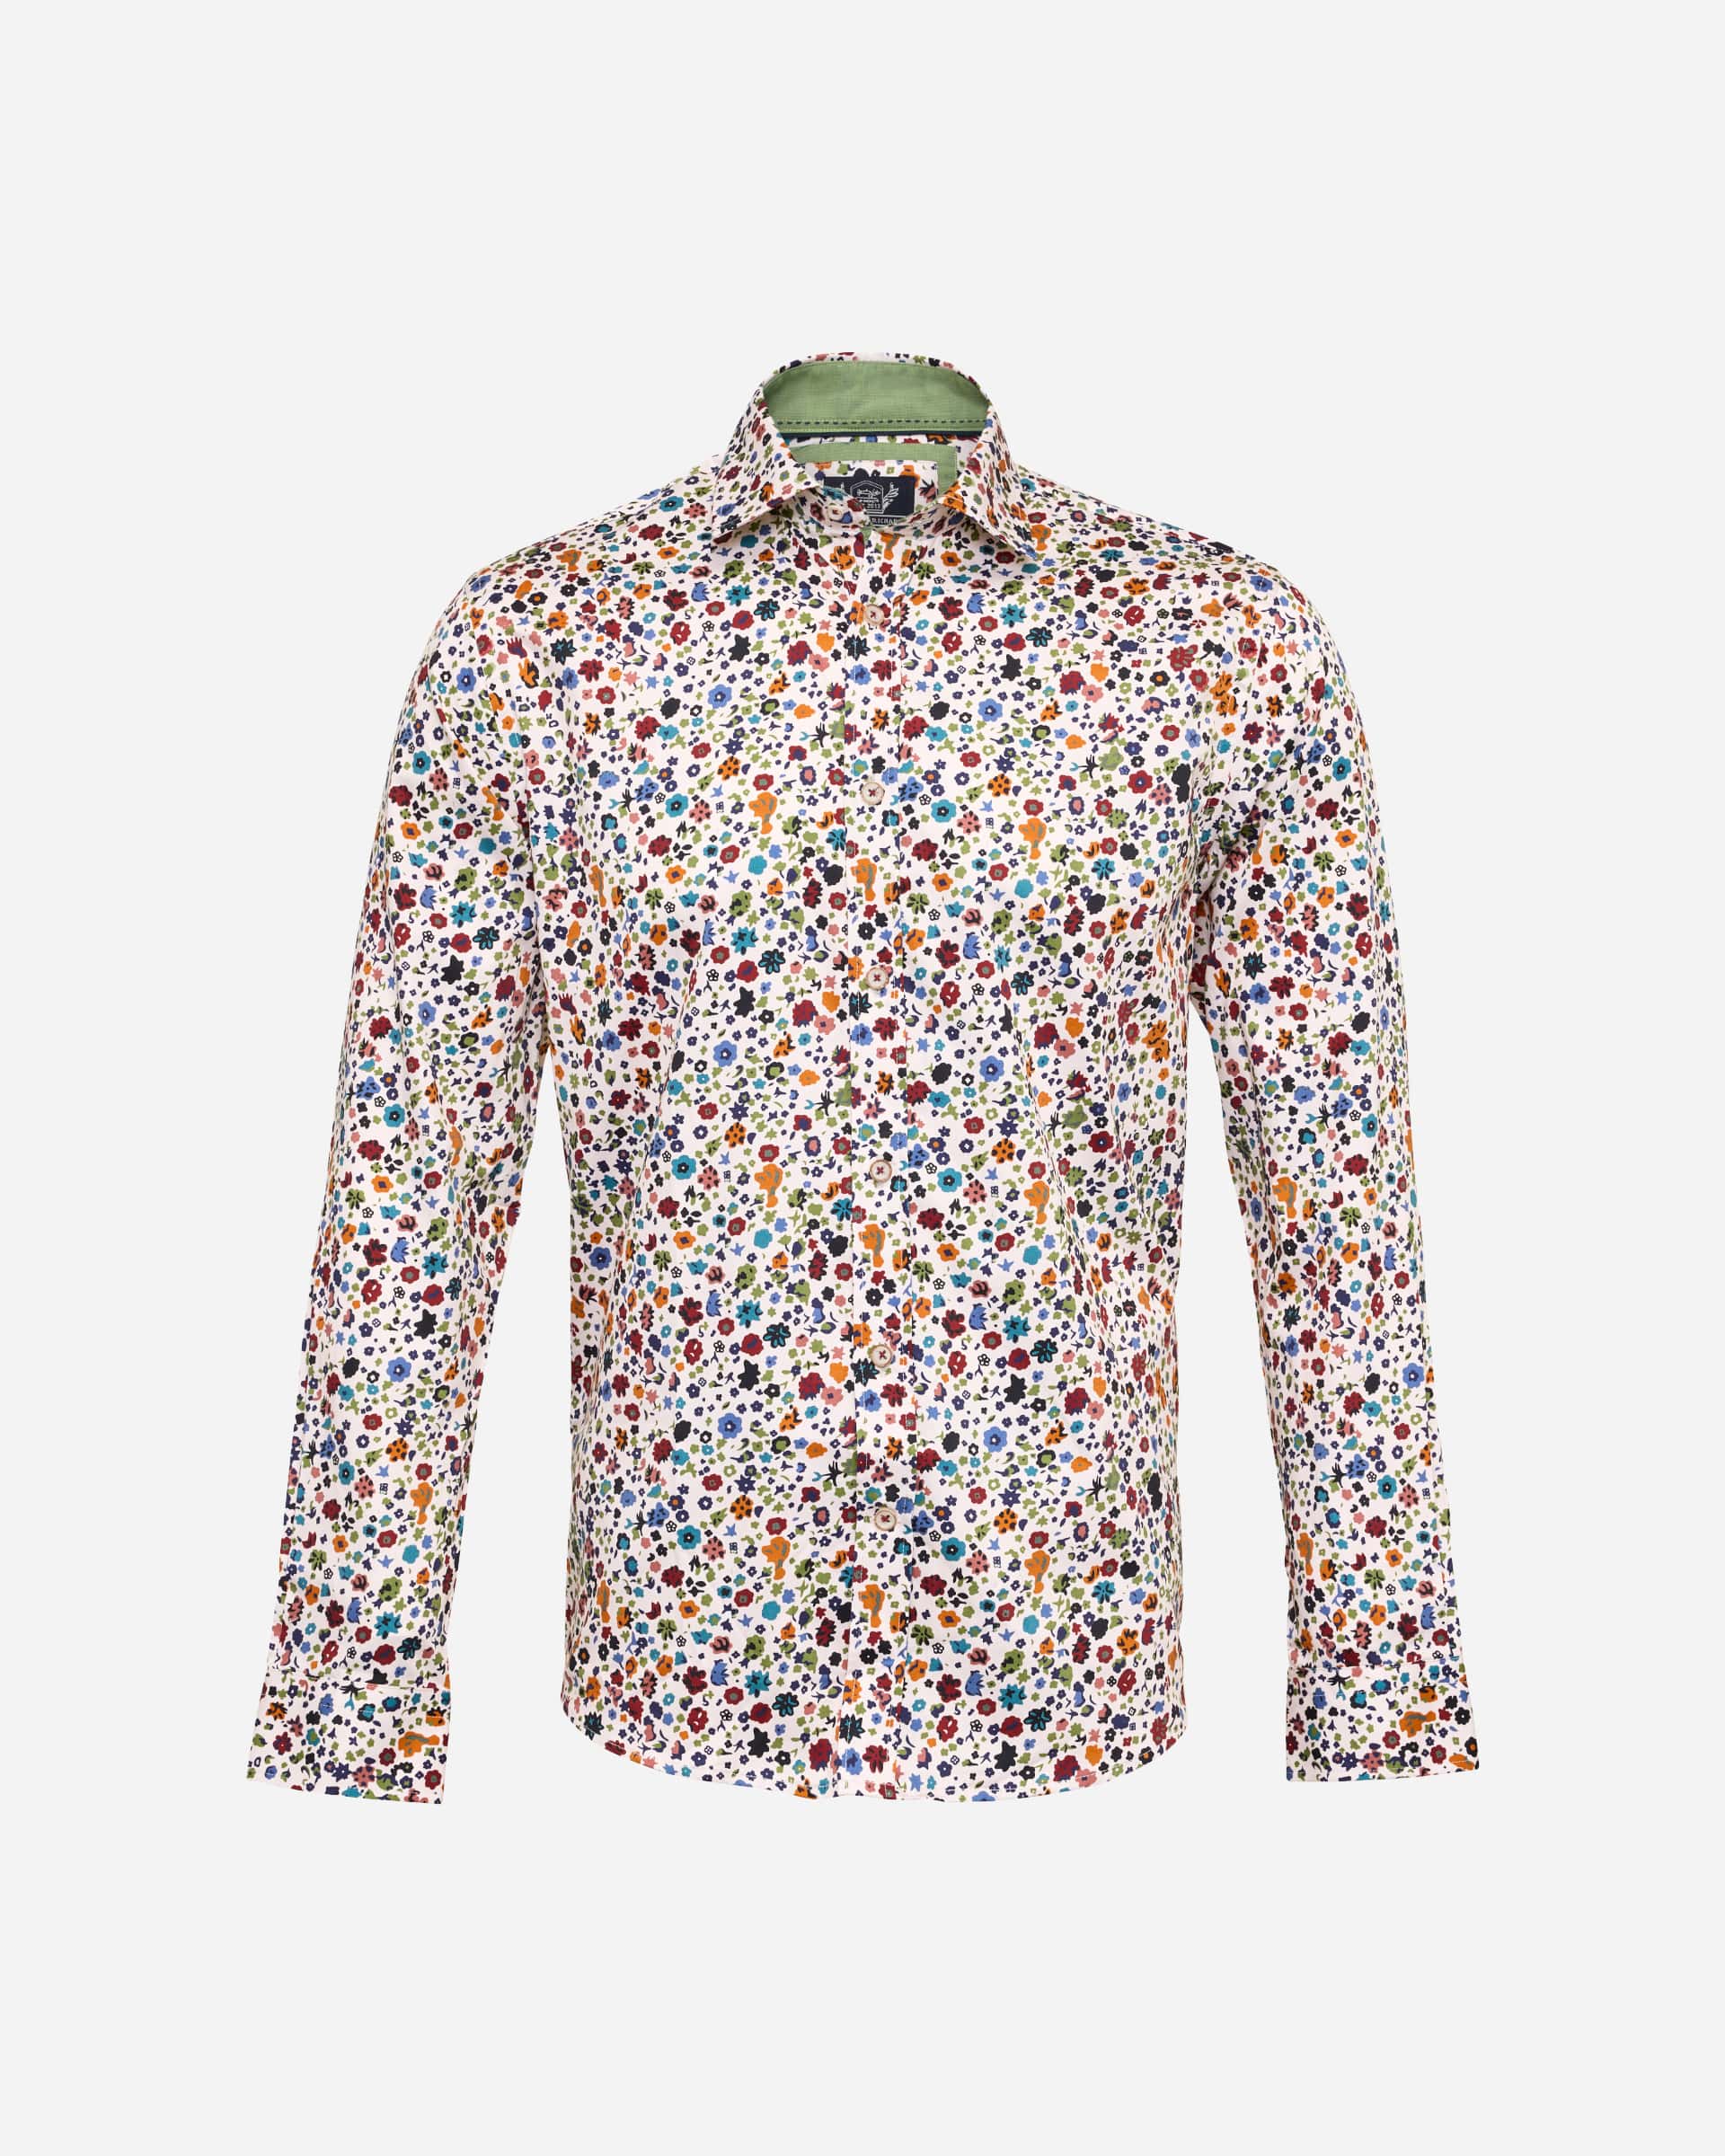 Picasso Shirt - Men's Casual Shirts at Menzclub